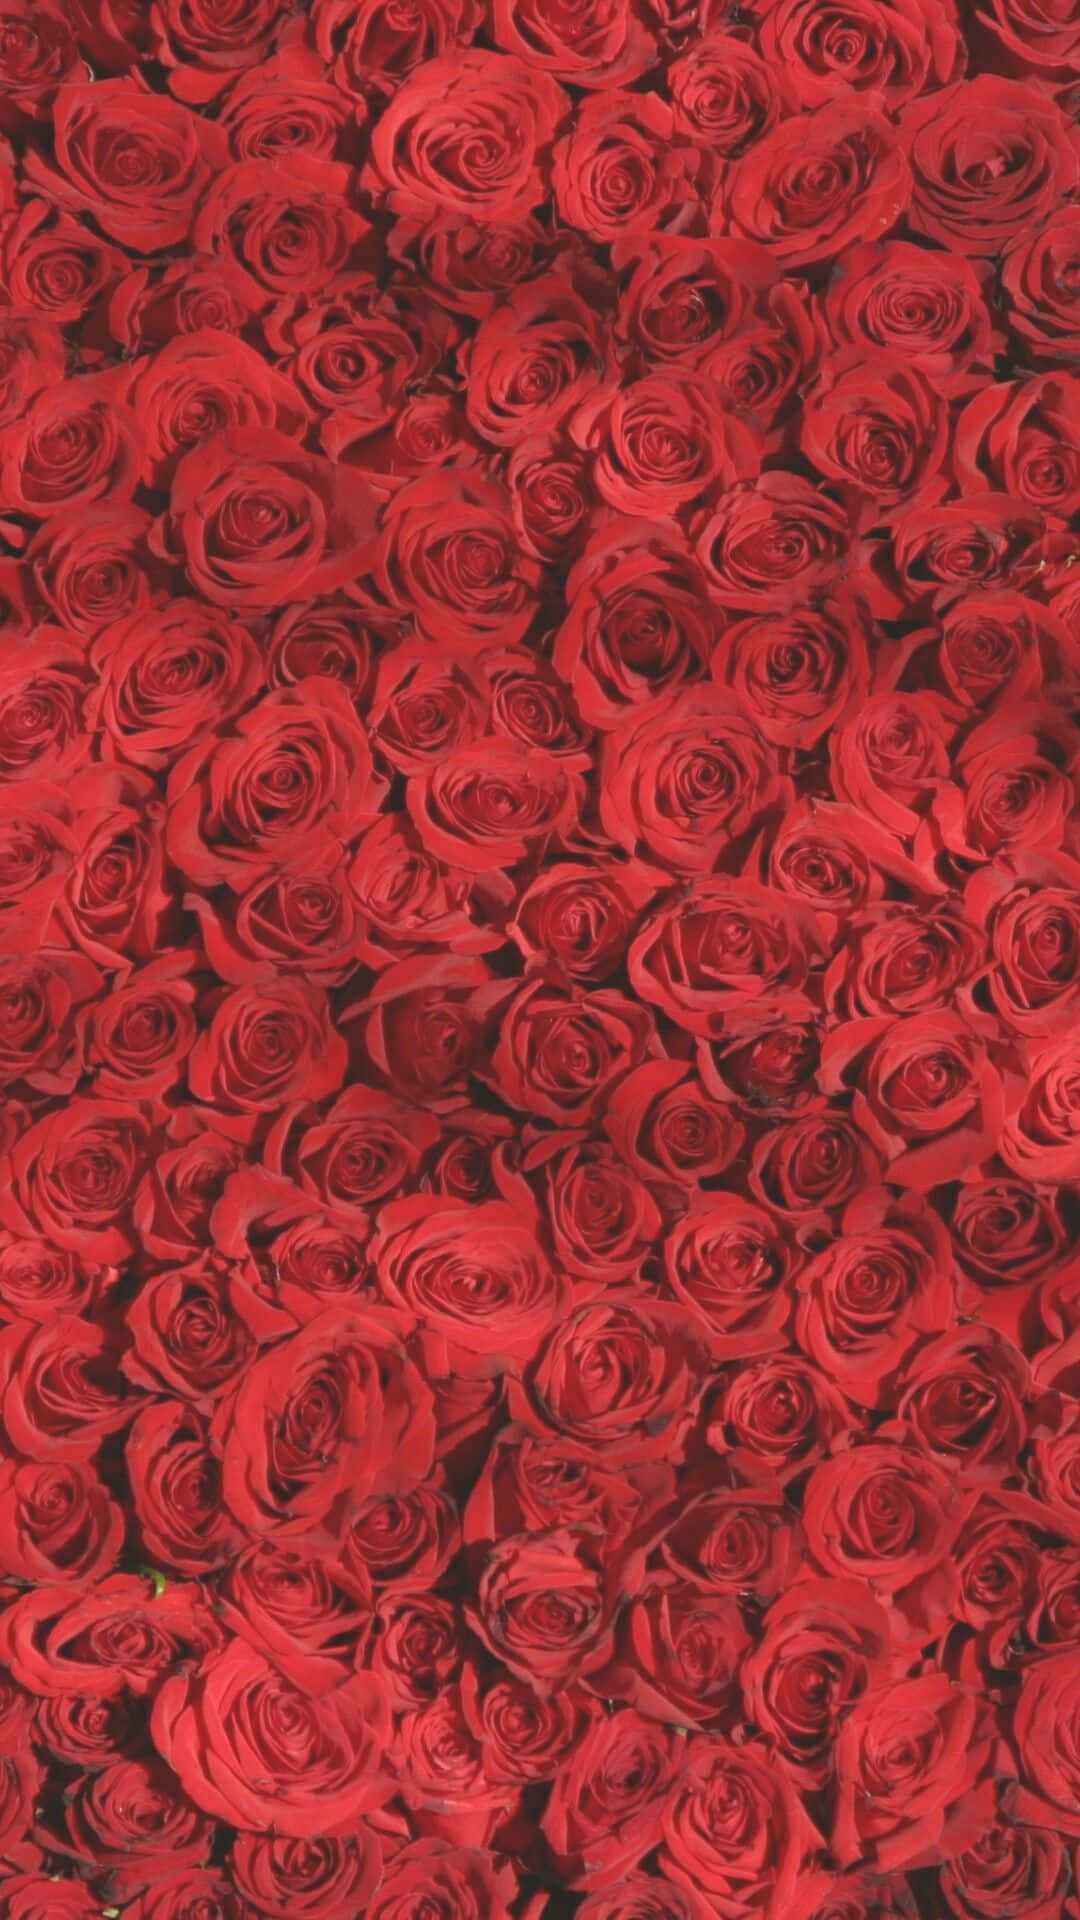 A Close Up Of Red Roses In A Vase Wallpaper